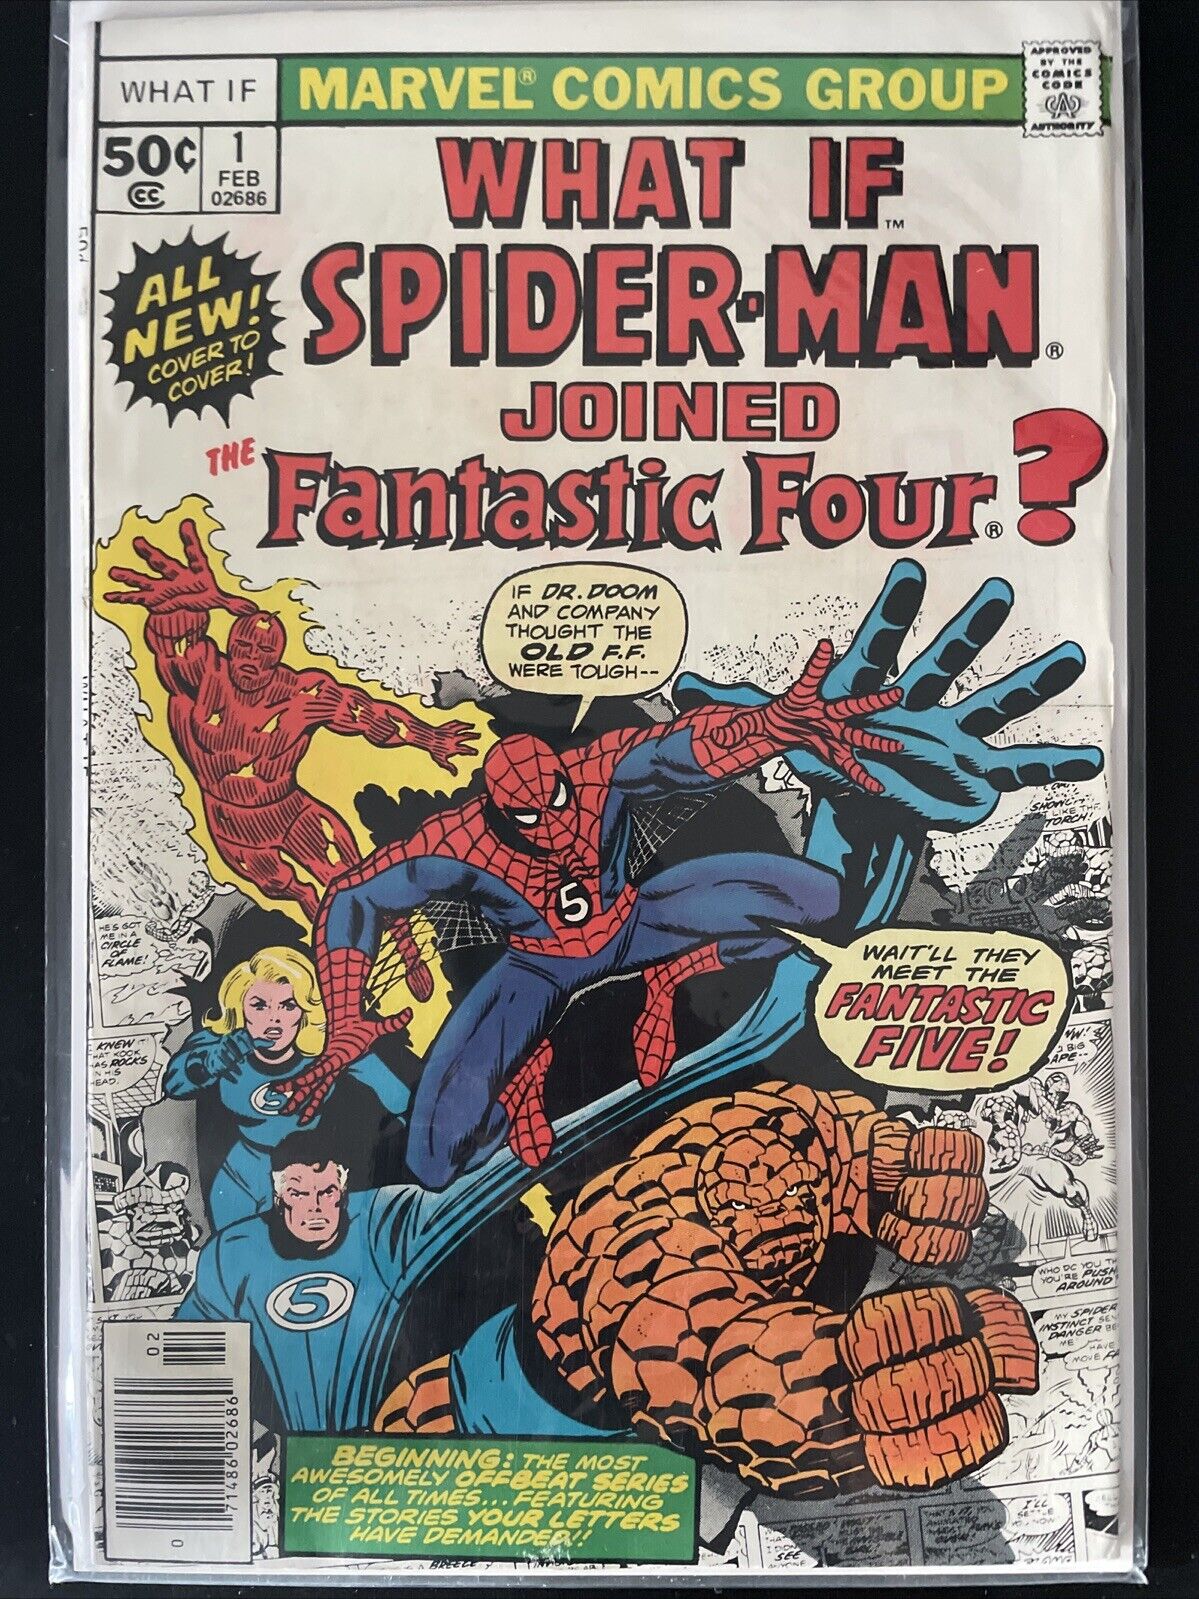 What If #1 Spider-Man Joined The Fantastic Four? (Feb 1977, Marvel Comics)